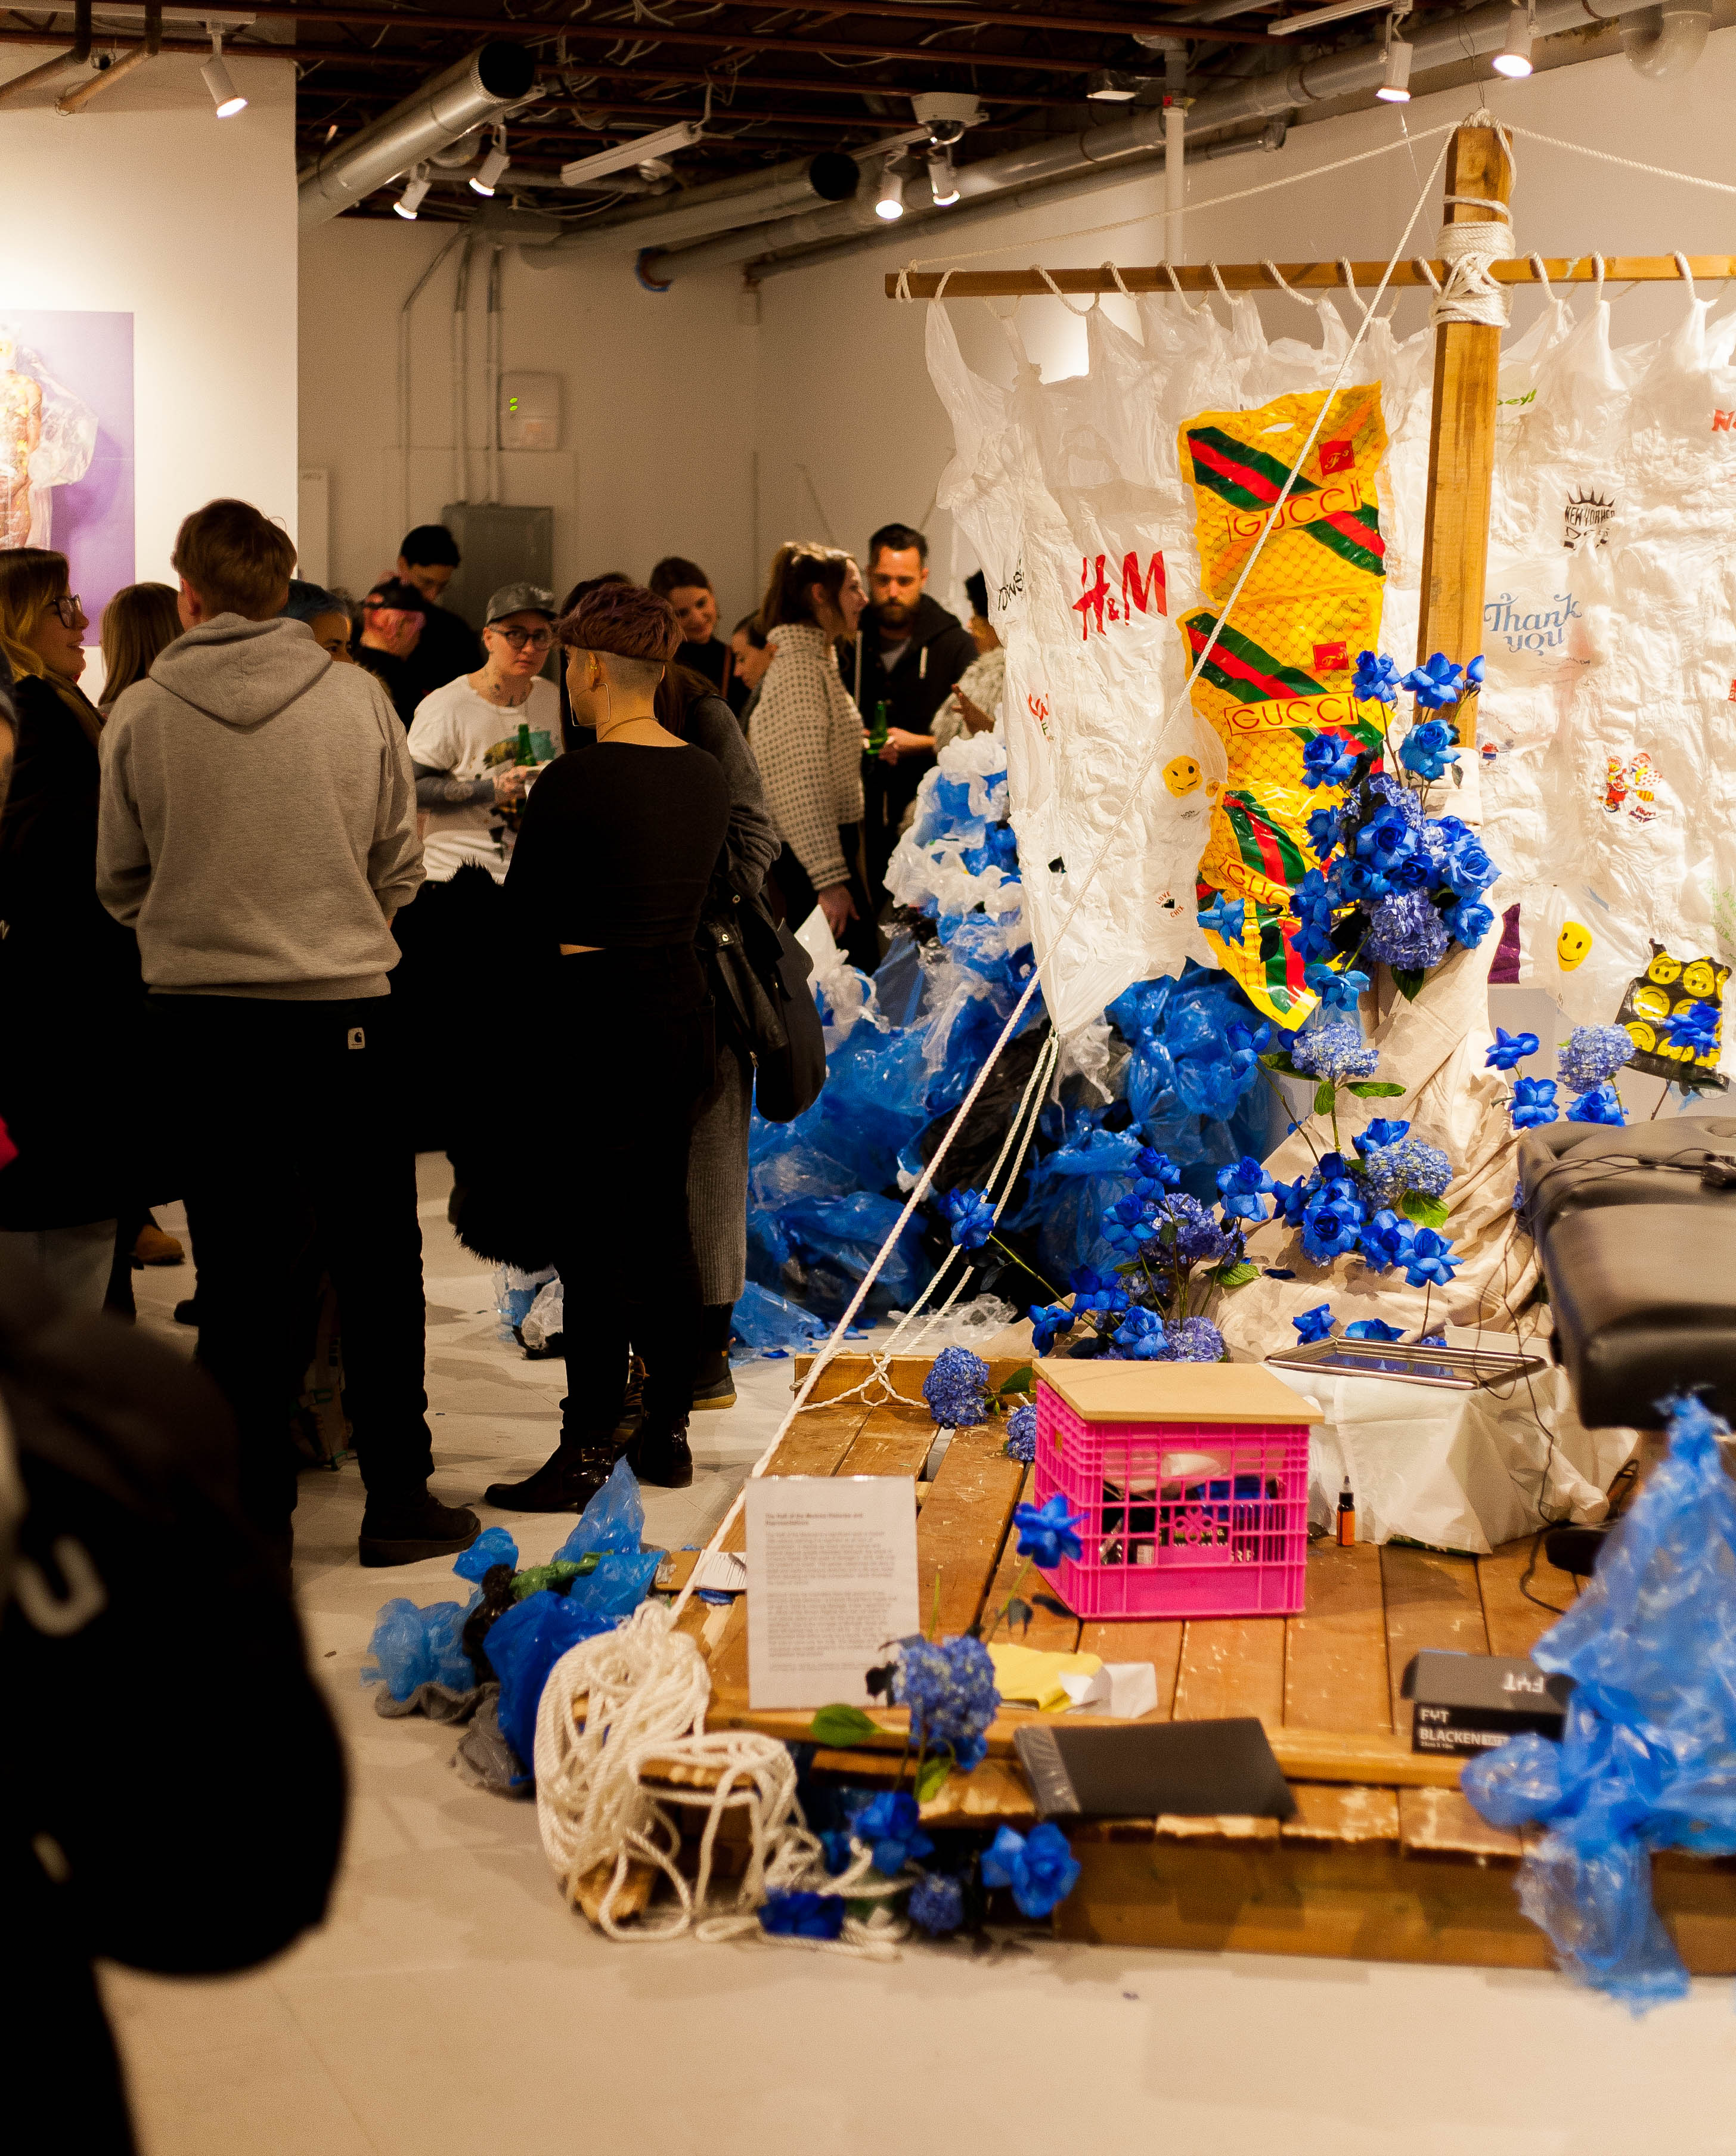 A photo of a busy gallery with a installation that resembles a raft with a sale, adorned with plastic bags.